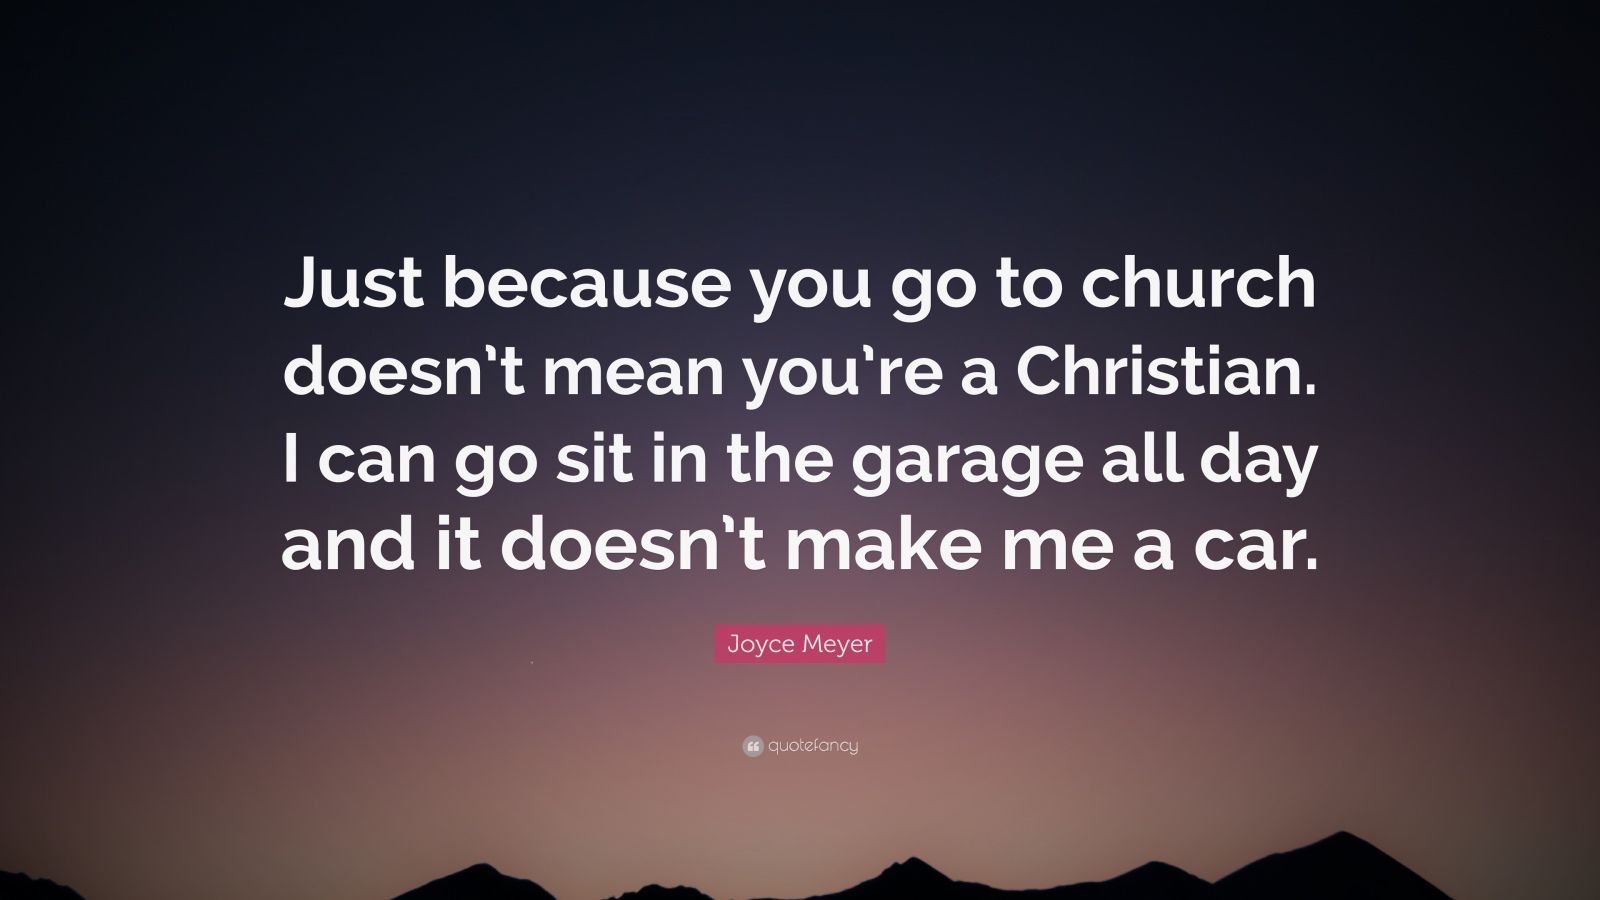 Joyce Meyer Quote: “Just because you go to church doesn’t mean you’re a